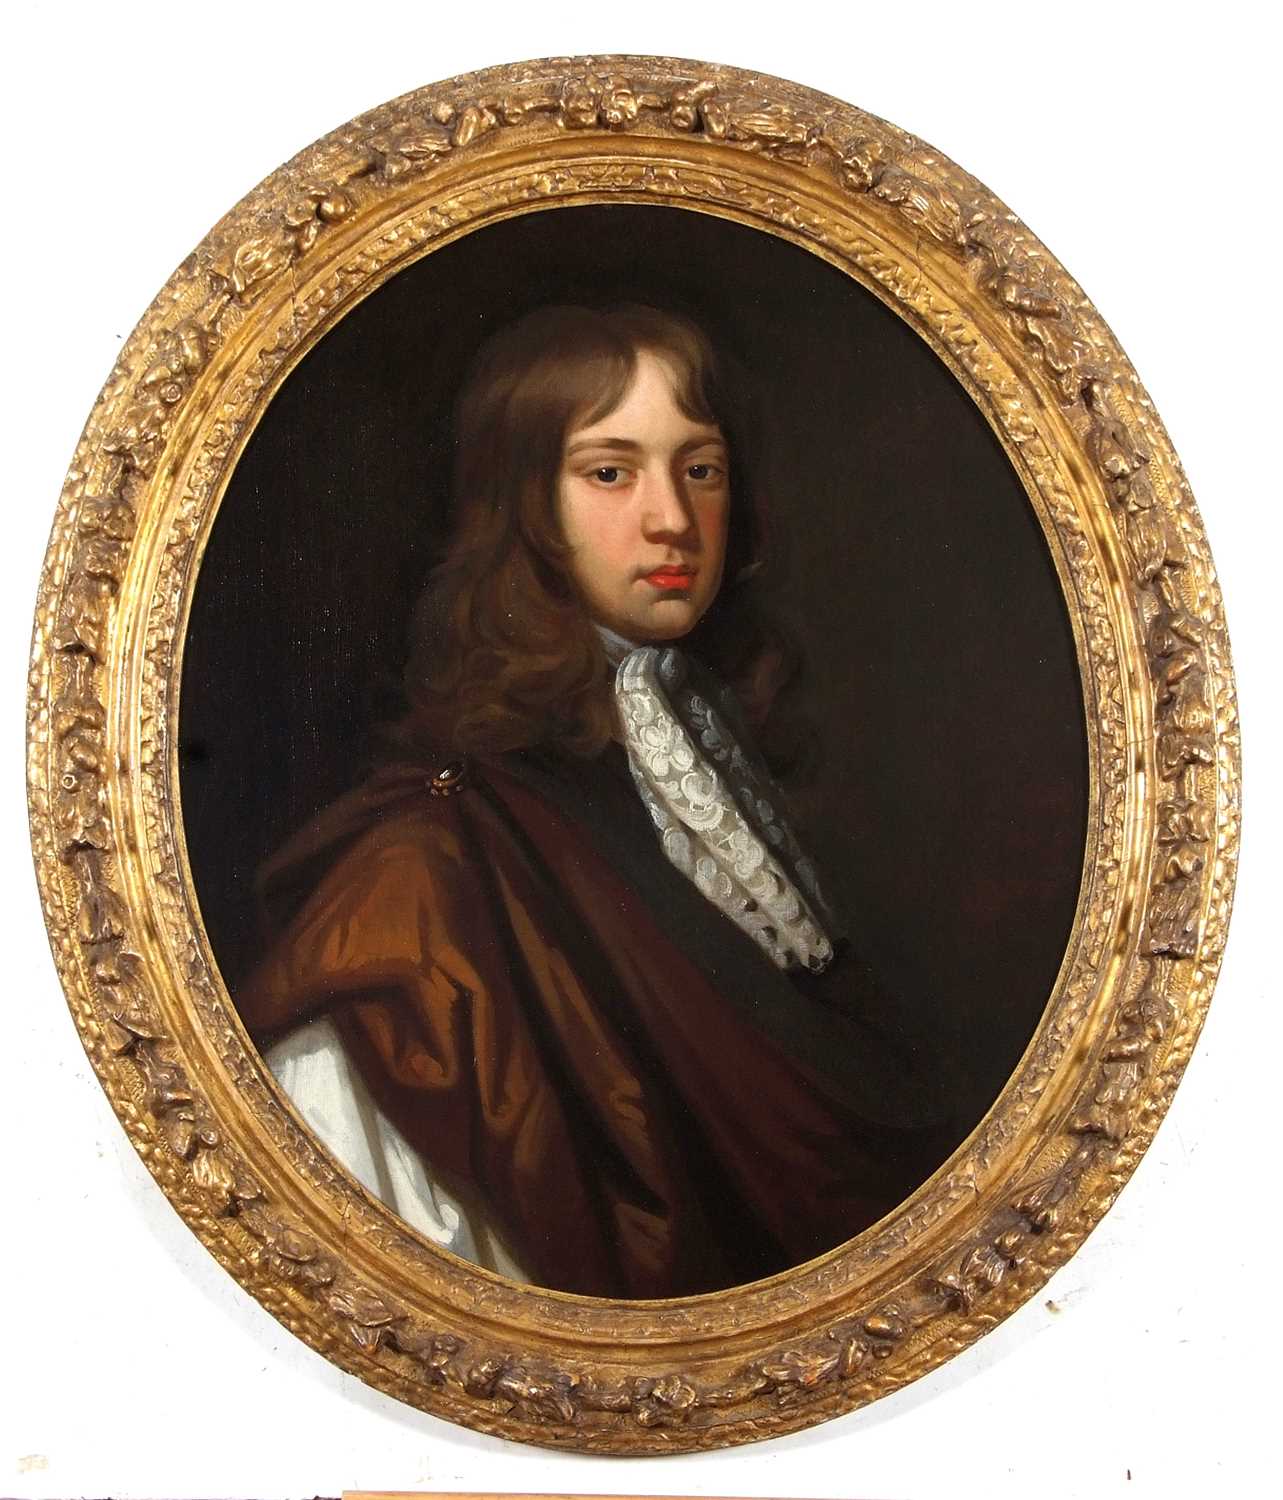 Attributed to Sir Godfrey Kneller (1646 -1723), Portrait of William Levinz (d.1747), son of